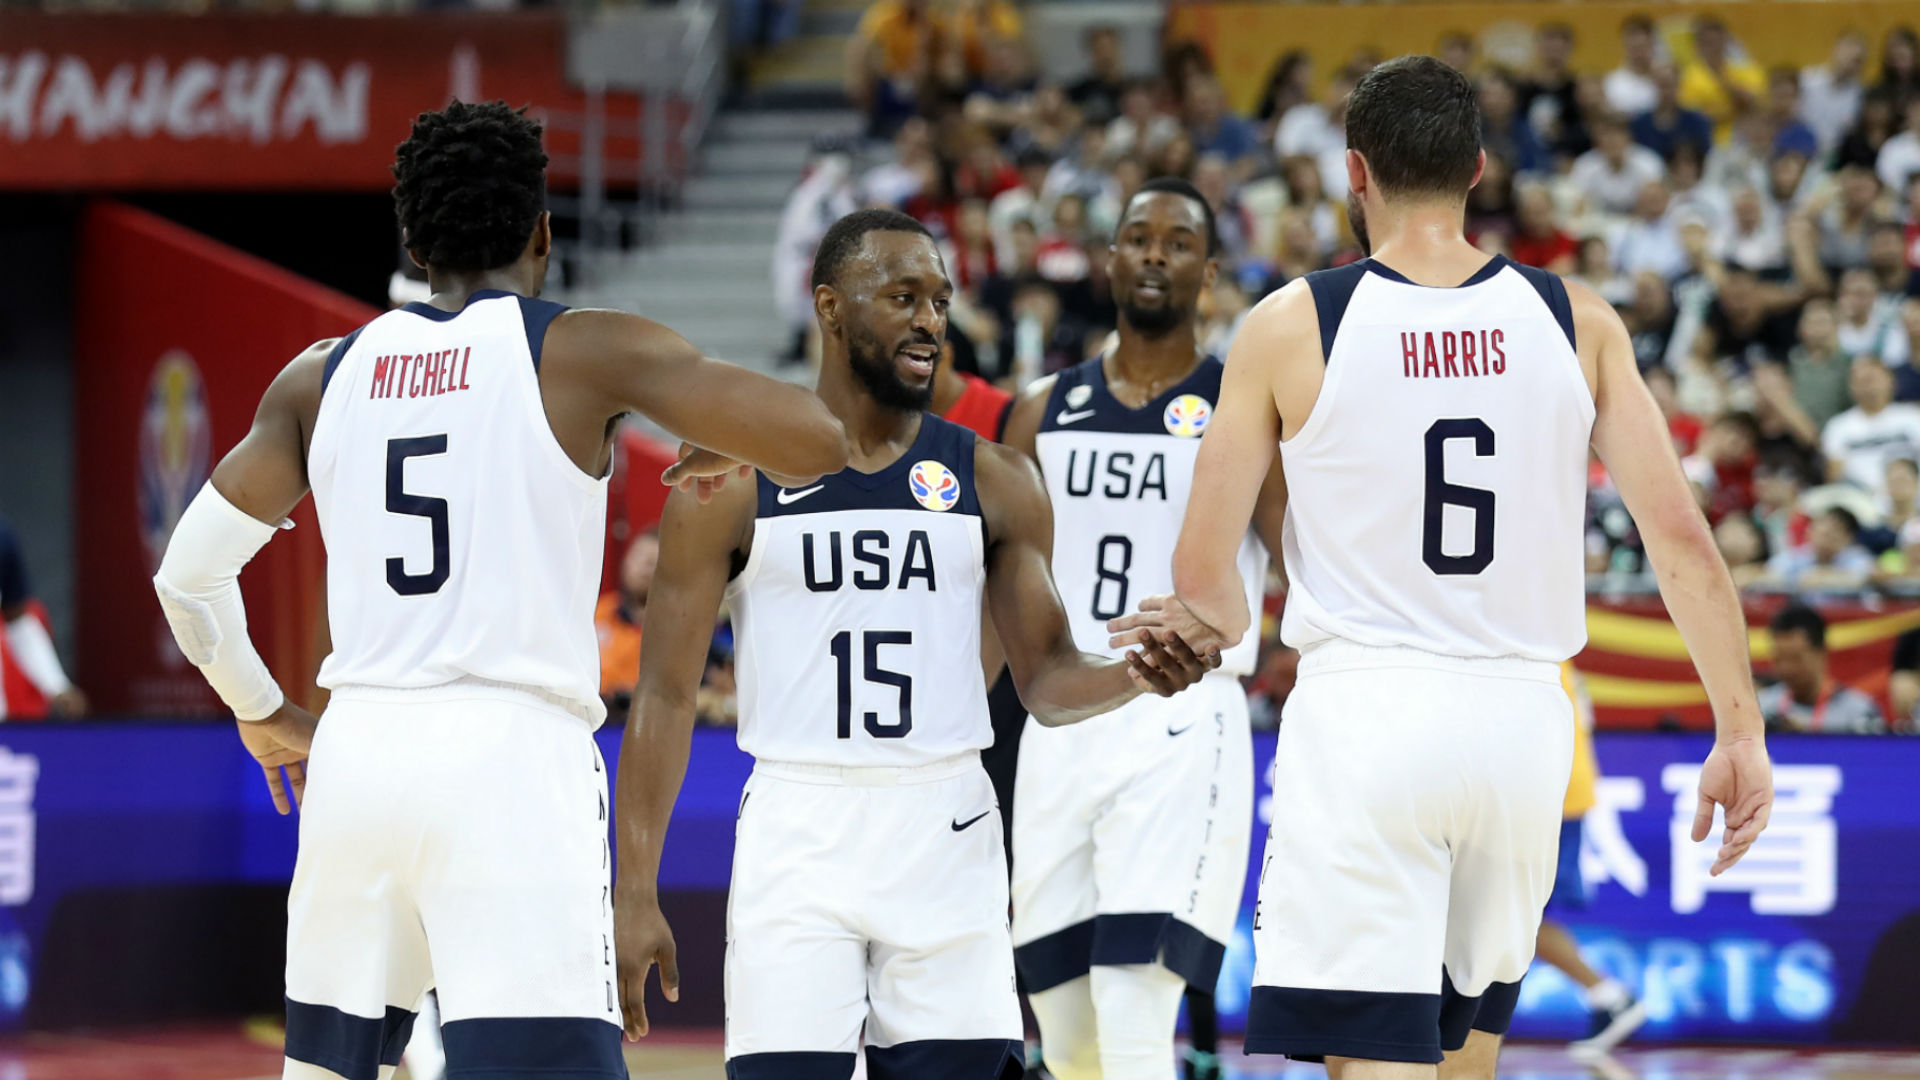 FIBA Basketball World Cup 2019 Takeaways from Team USA's performance